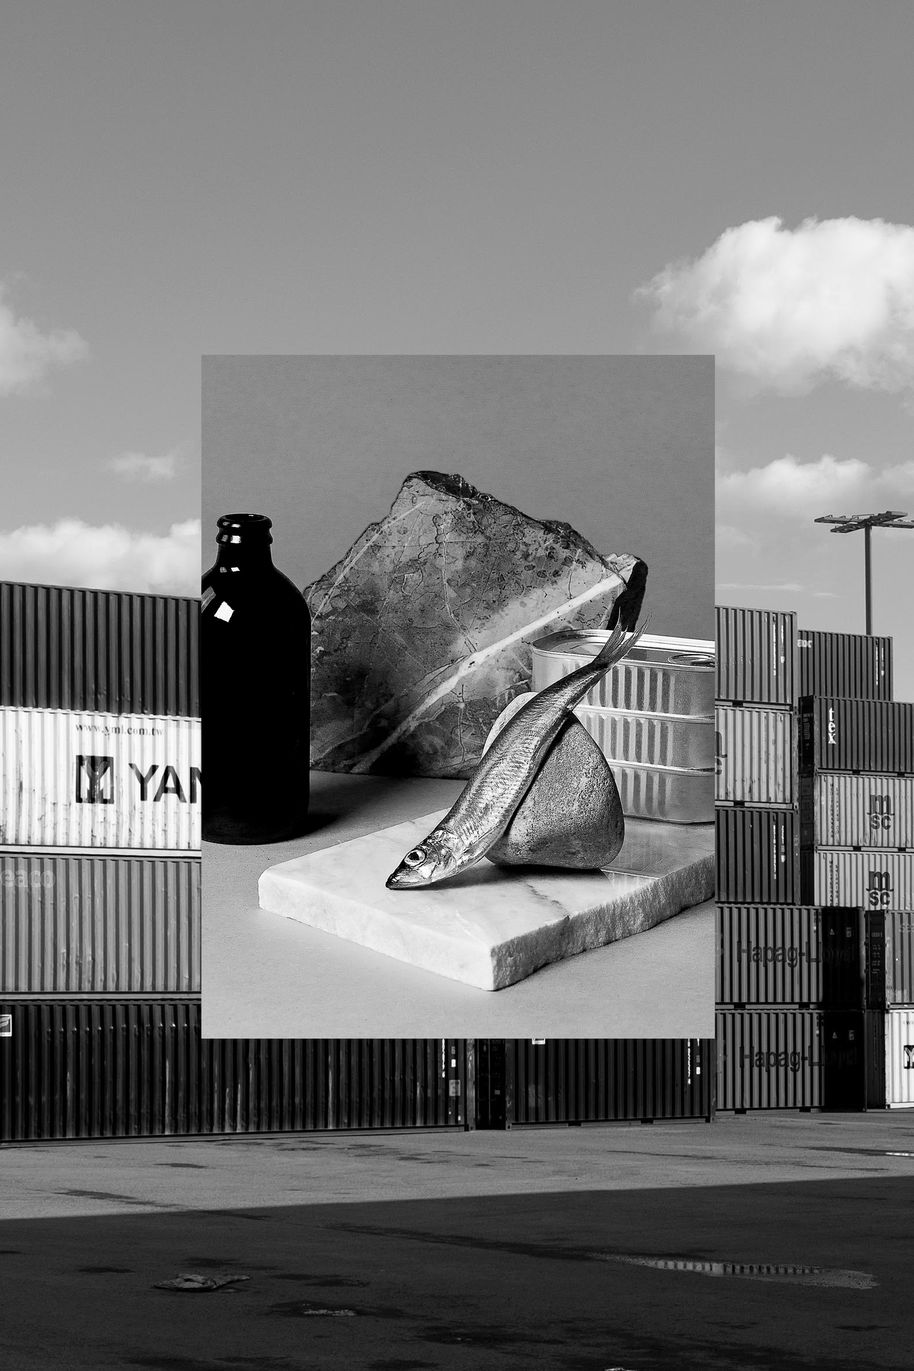 a collage of photos with shipping containers alongside with a set of still life objcts such as bottle, fish and rocks, all black and white